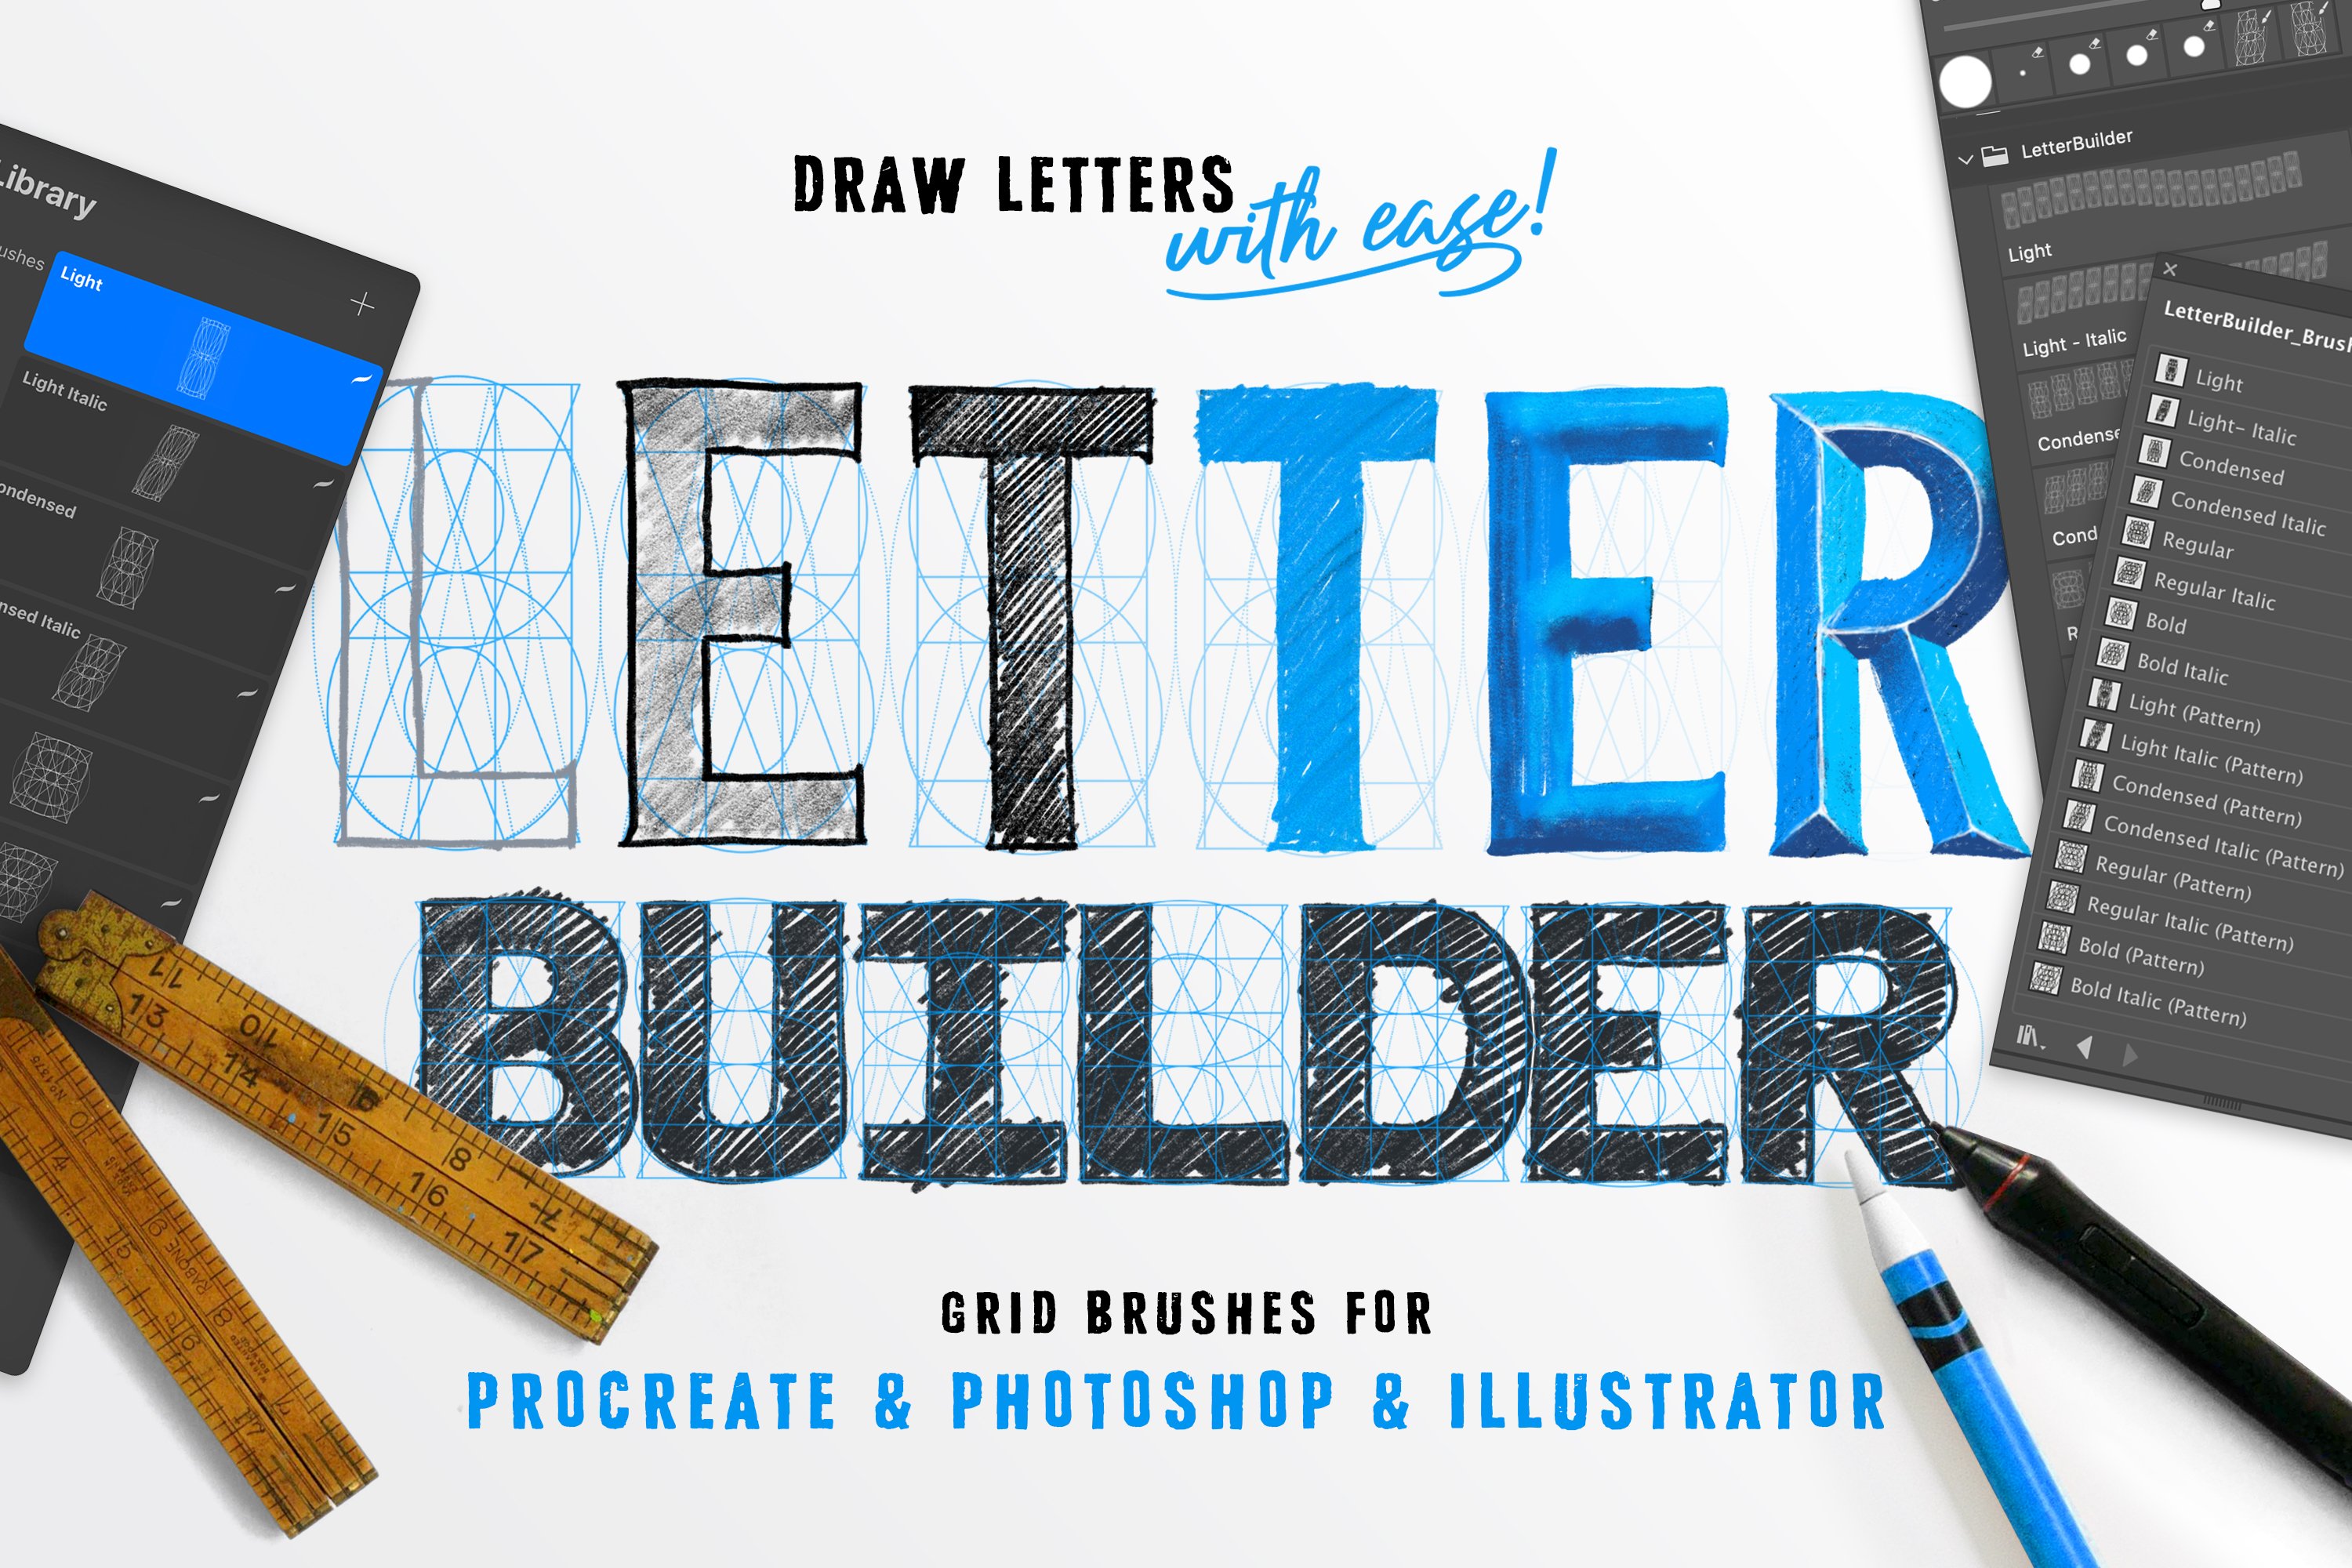 LetterBuilder - Draw letters easily!cover image.